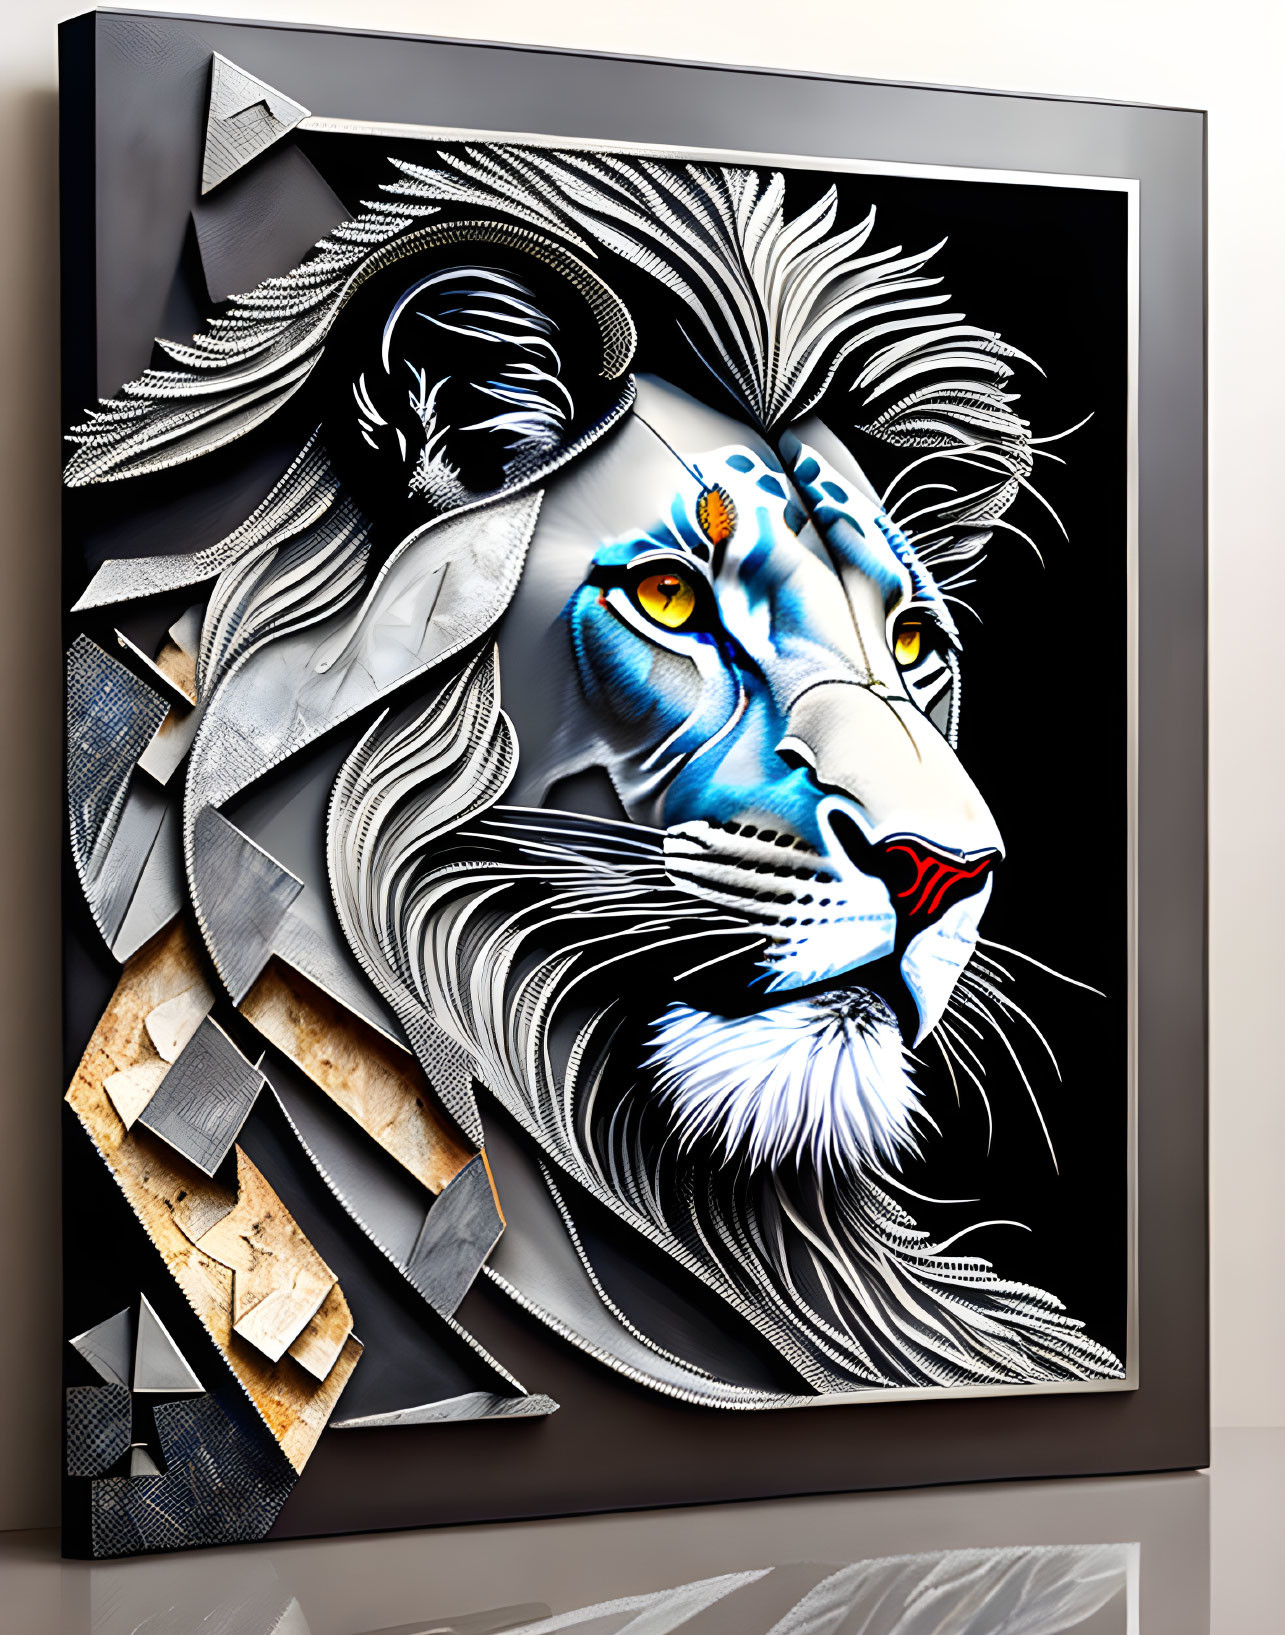 Abstract Lion Artwork in 3D Frame: White, Black, and Blue Hues